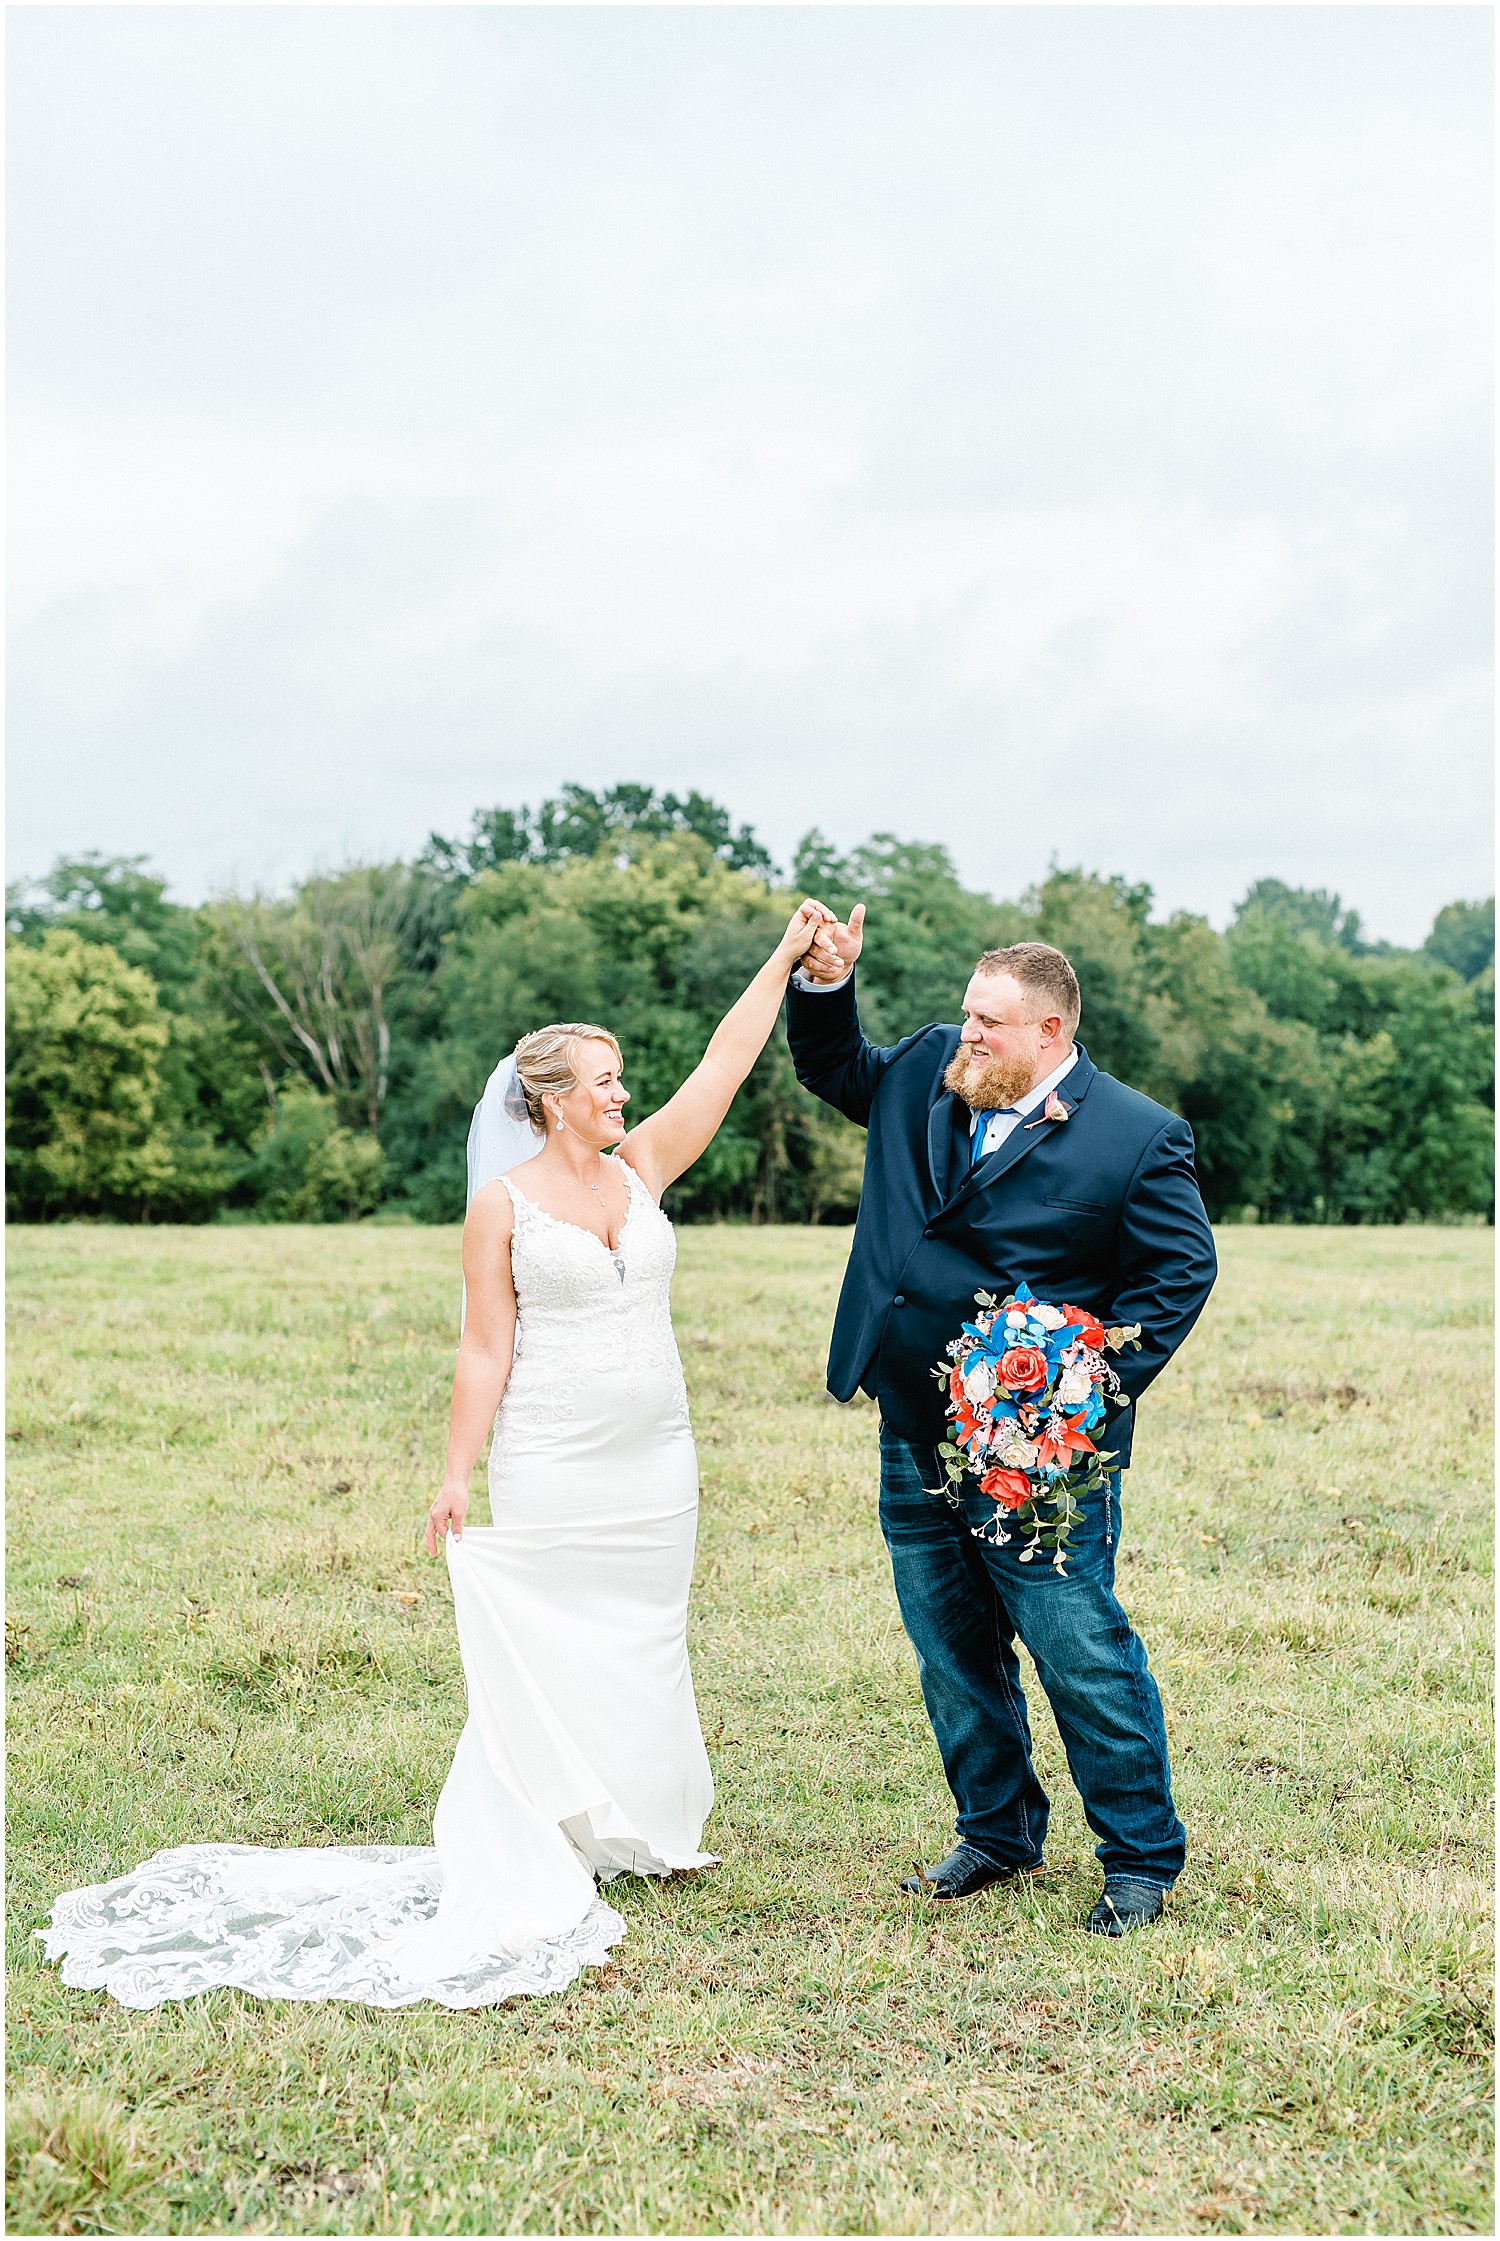 bride and groom dancing in field on wedding day